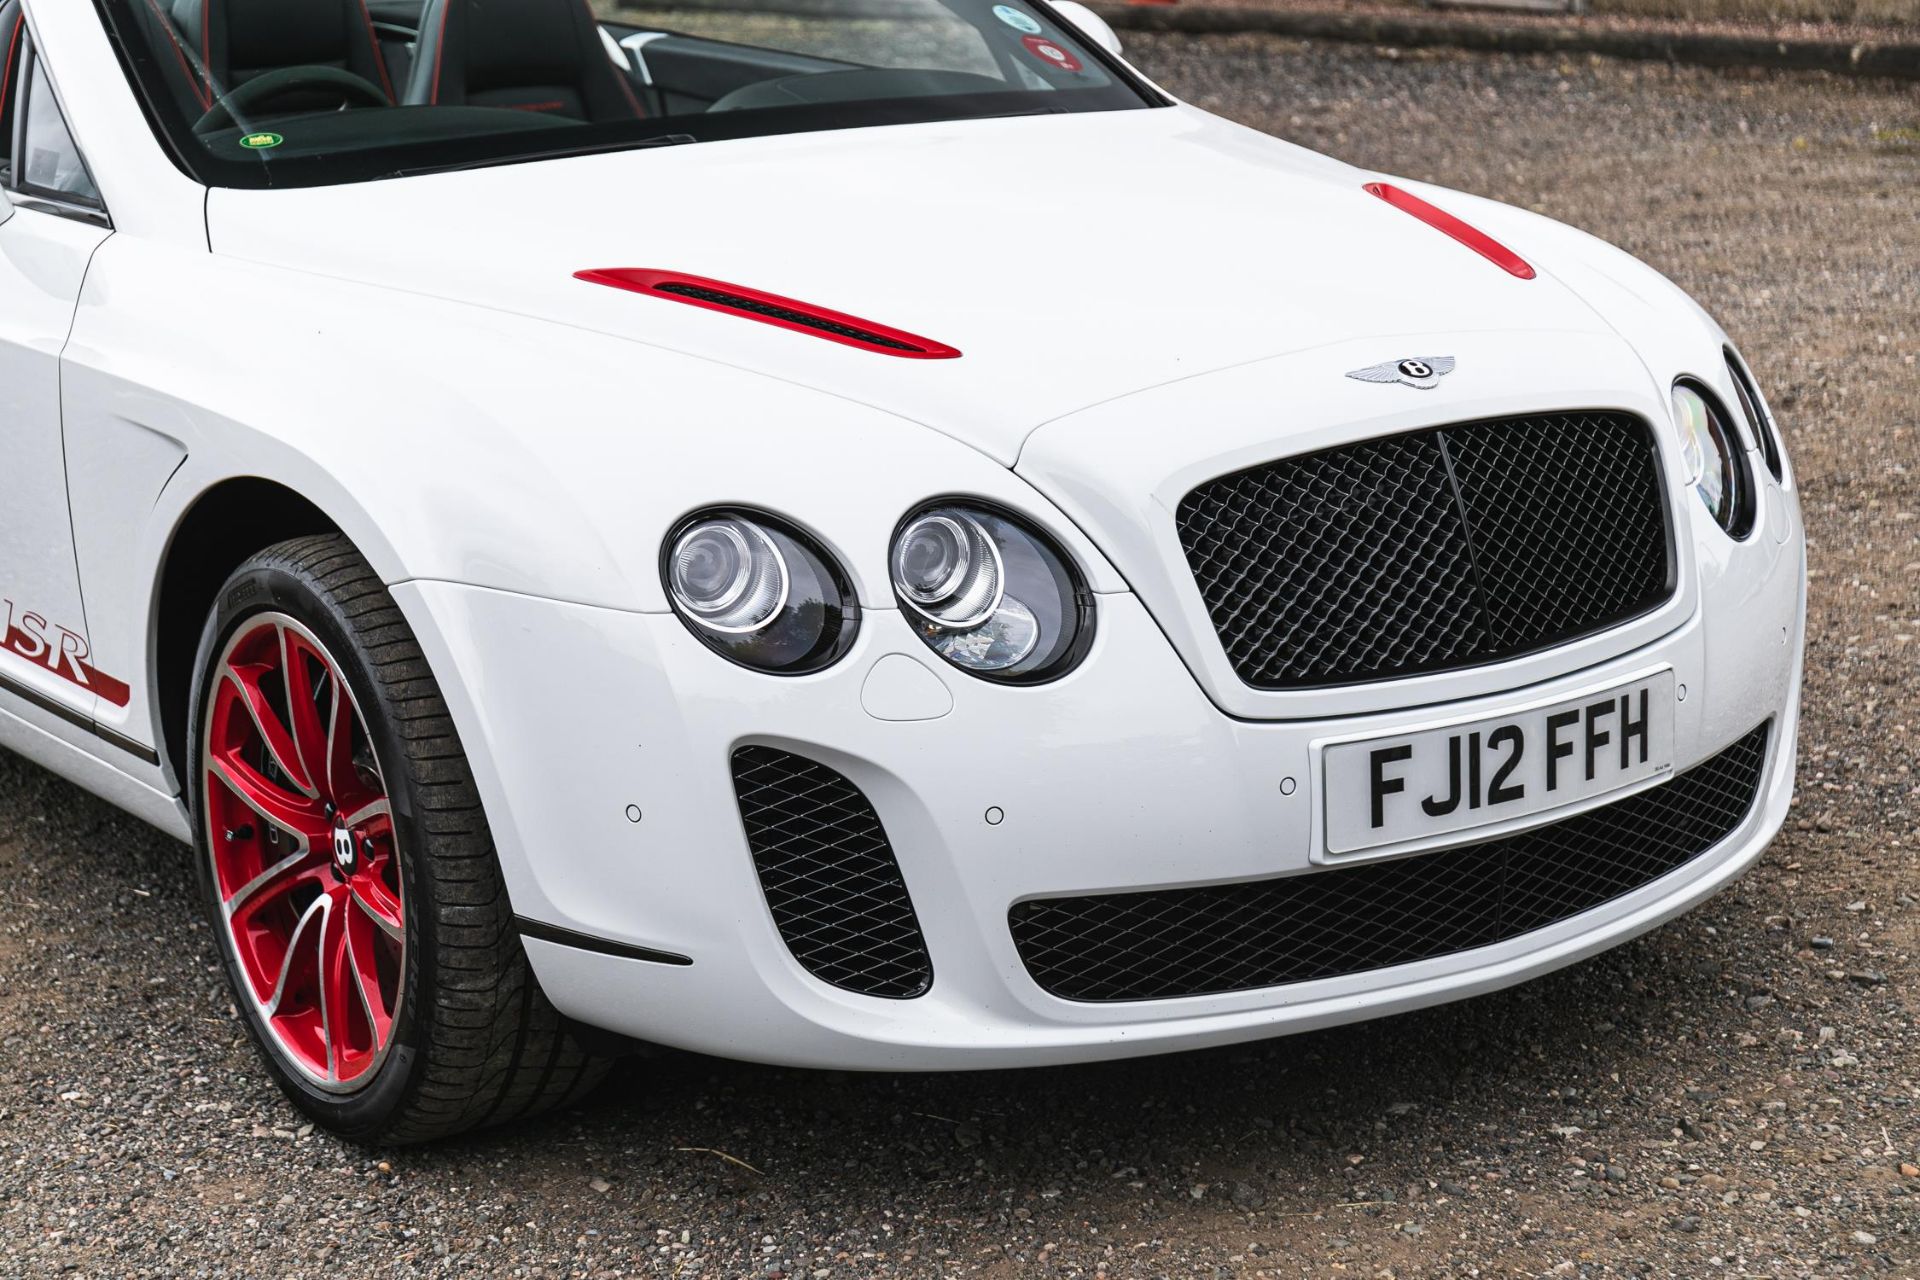 2012 Bentley Continental GTC Supersports Ice Speed Record Edition - Image 8 of 10